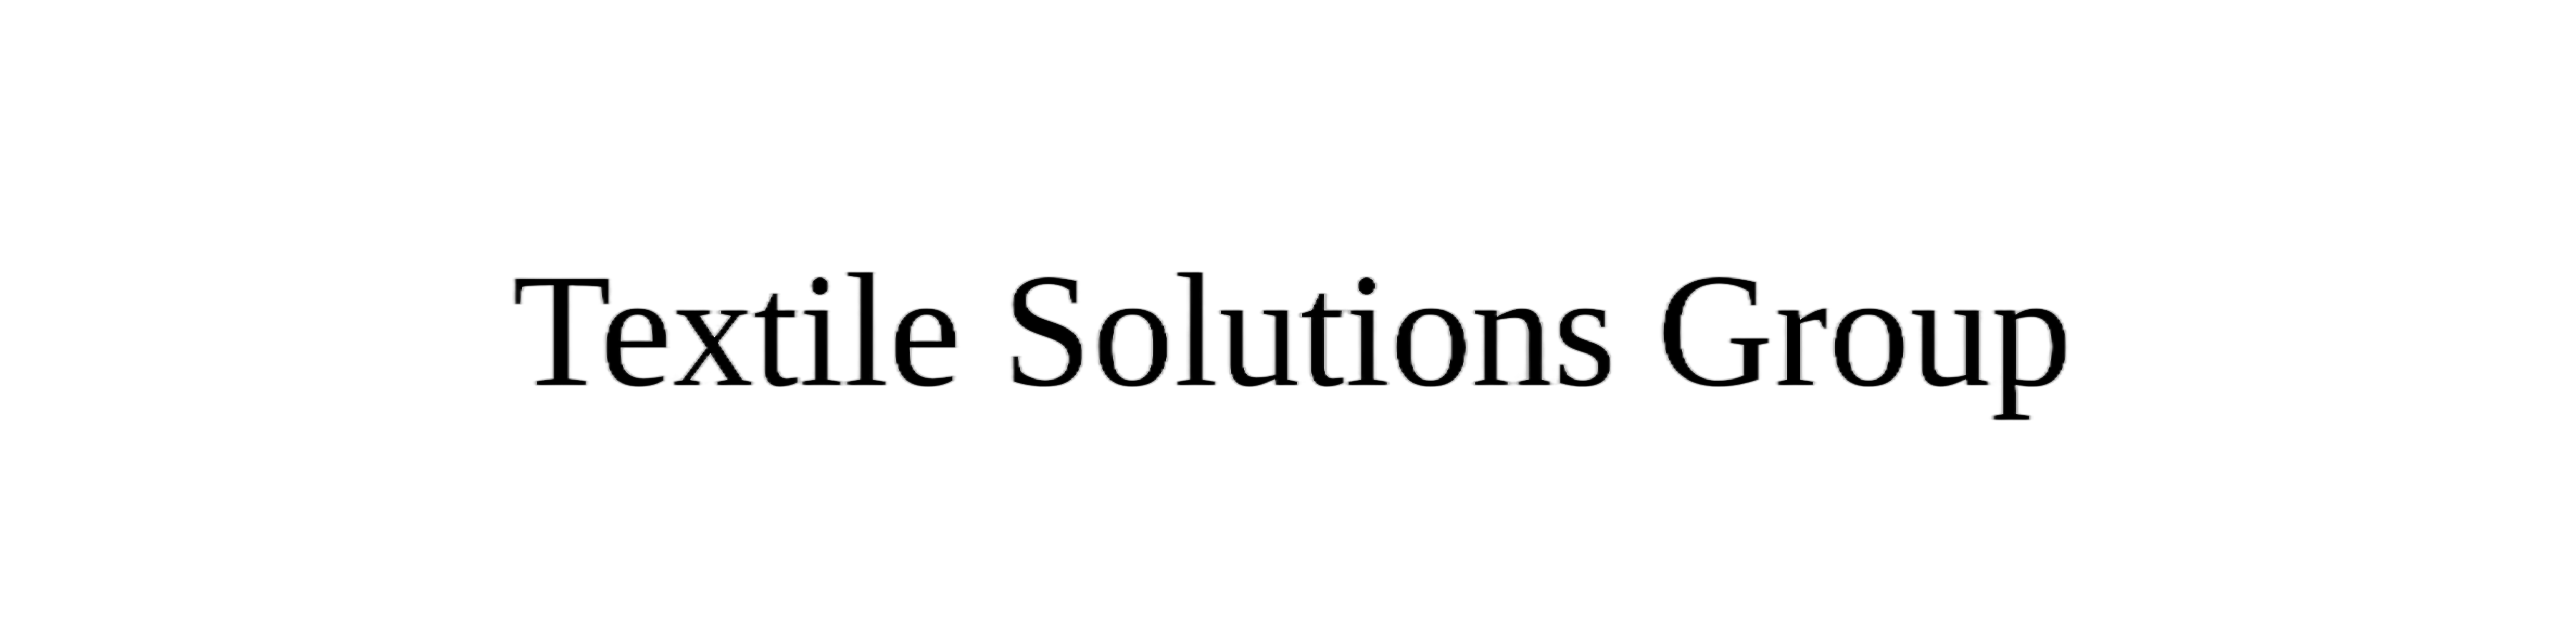 Textile Solutions Group